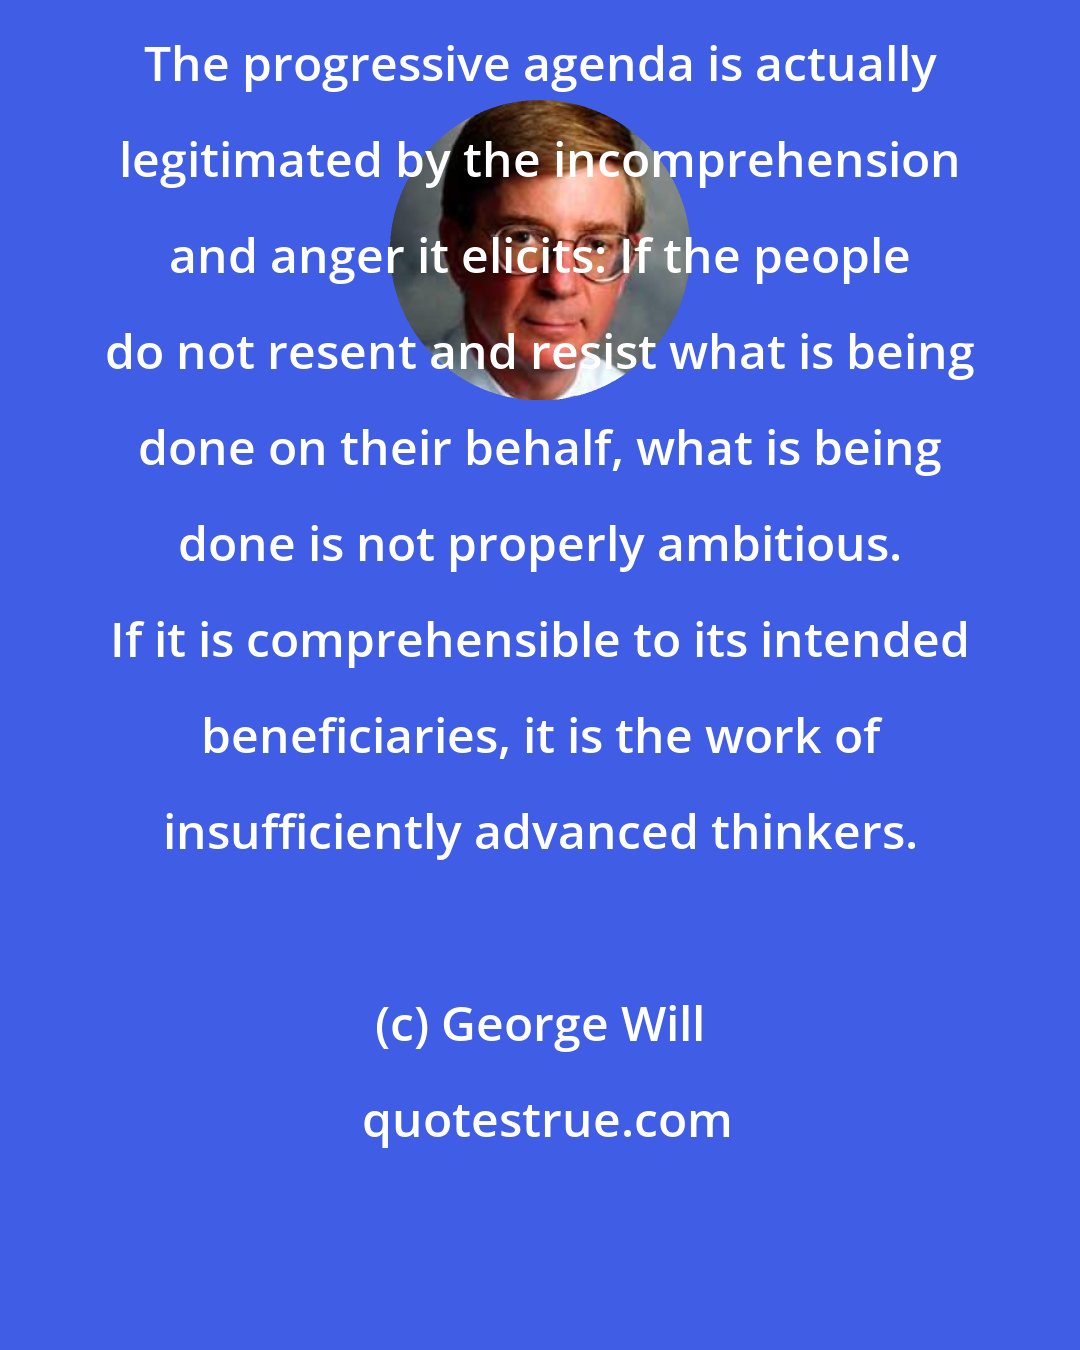 George Will: The progressive agenda is actually legitimated by the incomprehension and anger it elicits: If the people do not resent and resist what is being done on their behalf, what is being done is not properly ambitious. If it is comprehensible to its intended beneficiaries, it is the work of insufficiently advanced thinkers.